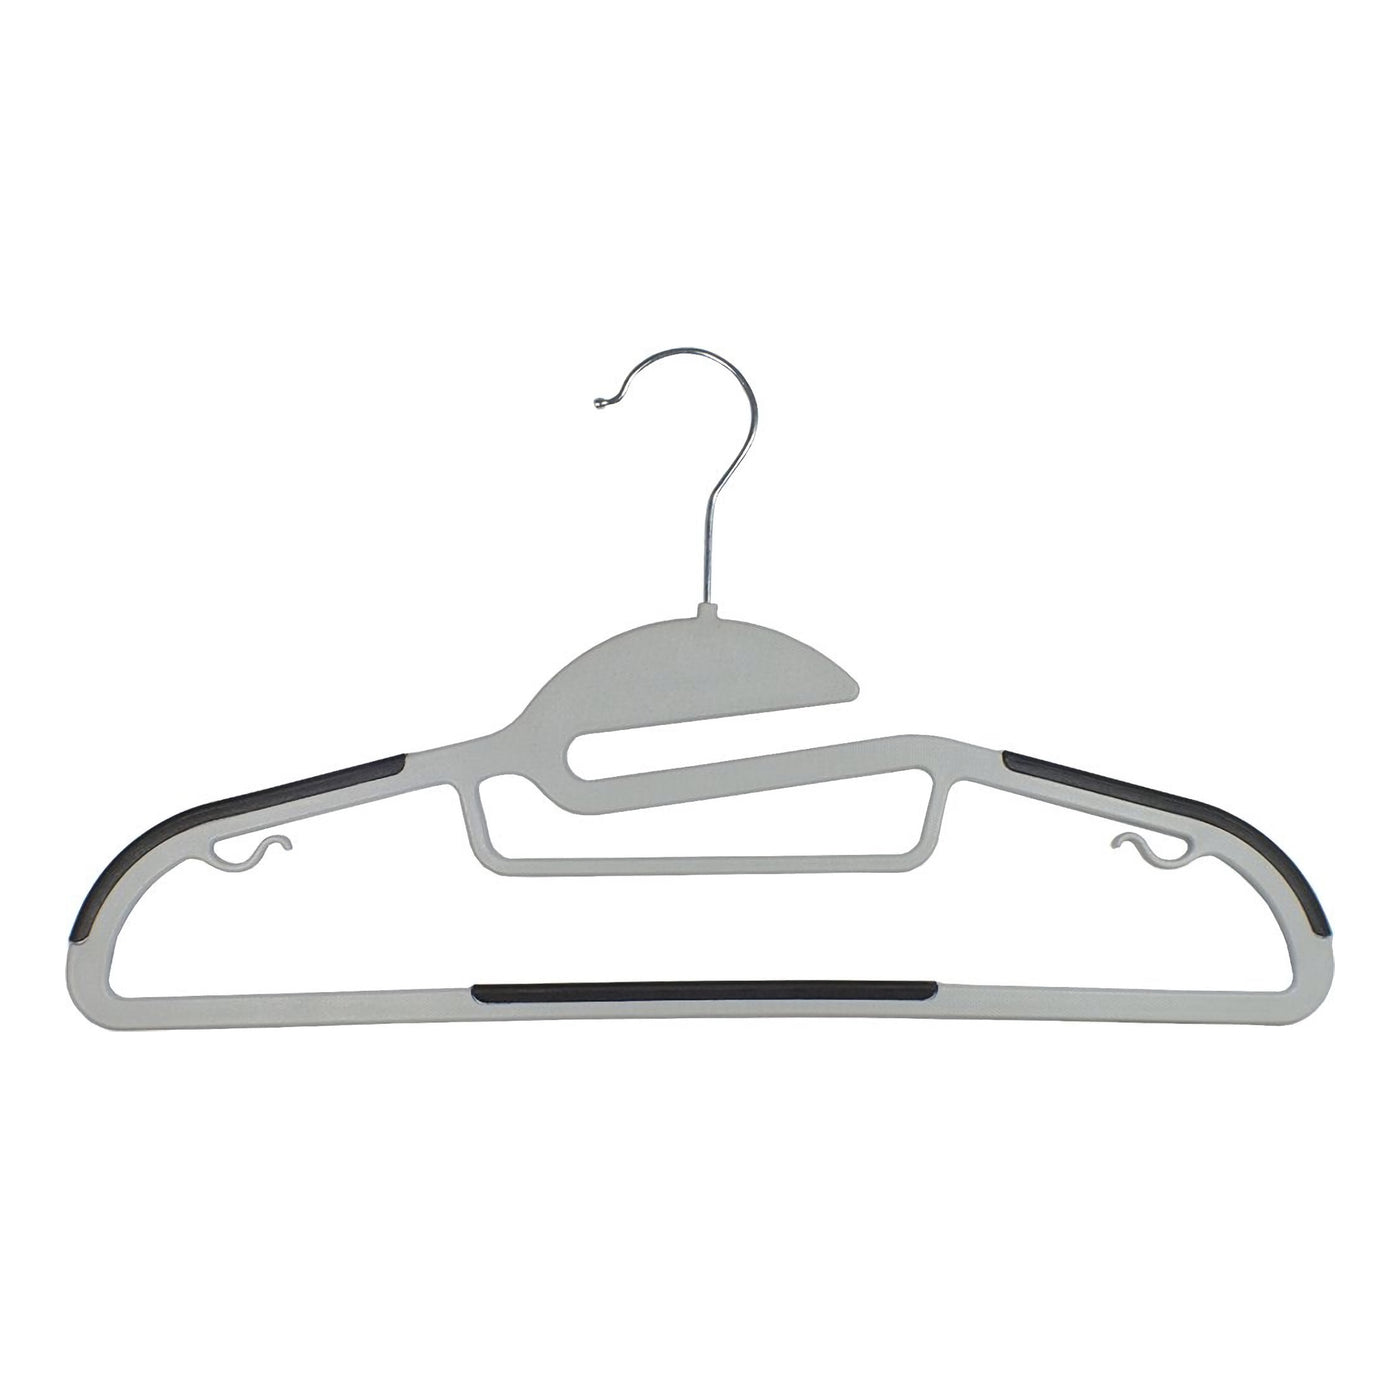 Durable Clear Plastic Pants Clothing Hangers with Clips, 14 inch, 25 Pack